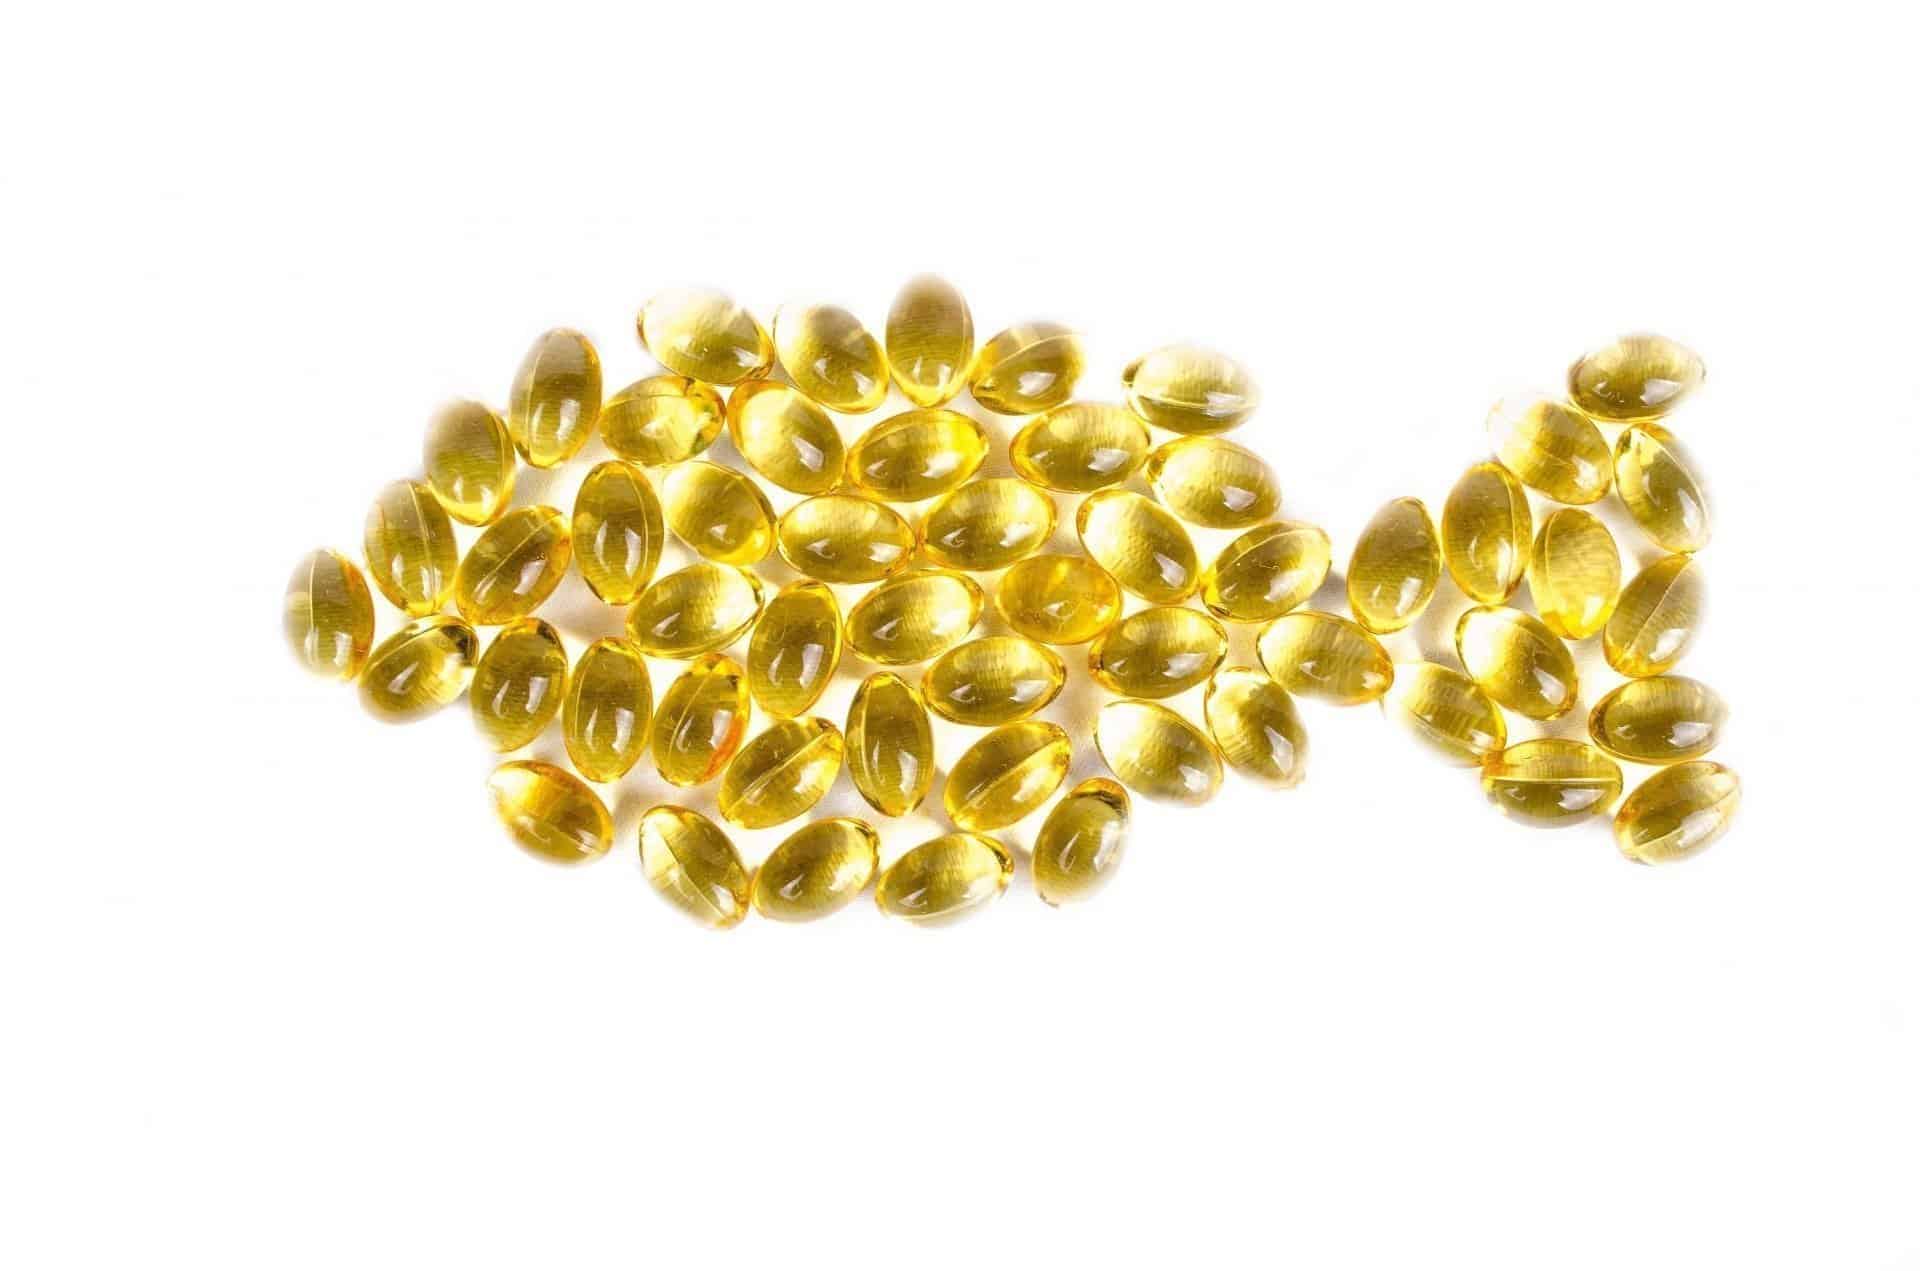 fish oil - Why Fish Oil Is Good For Dogs